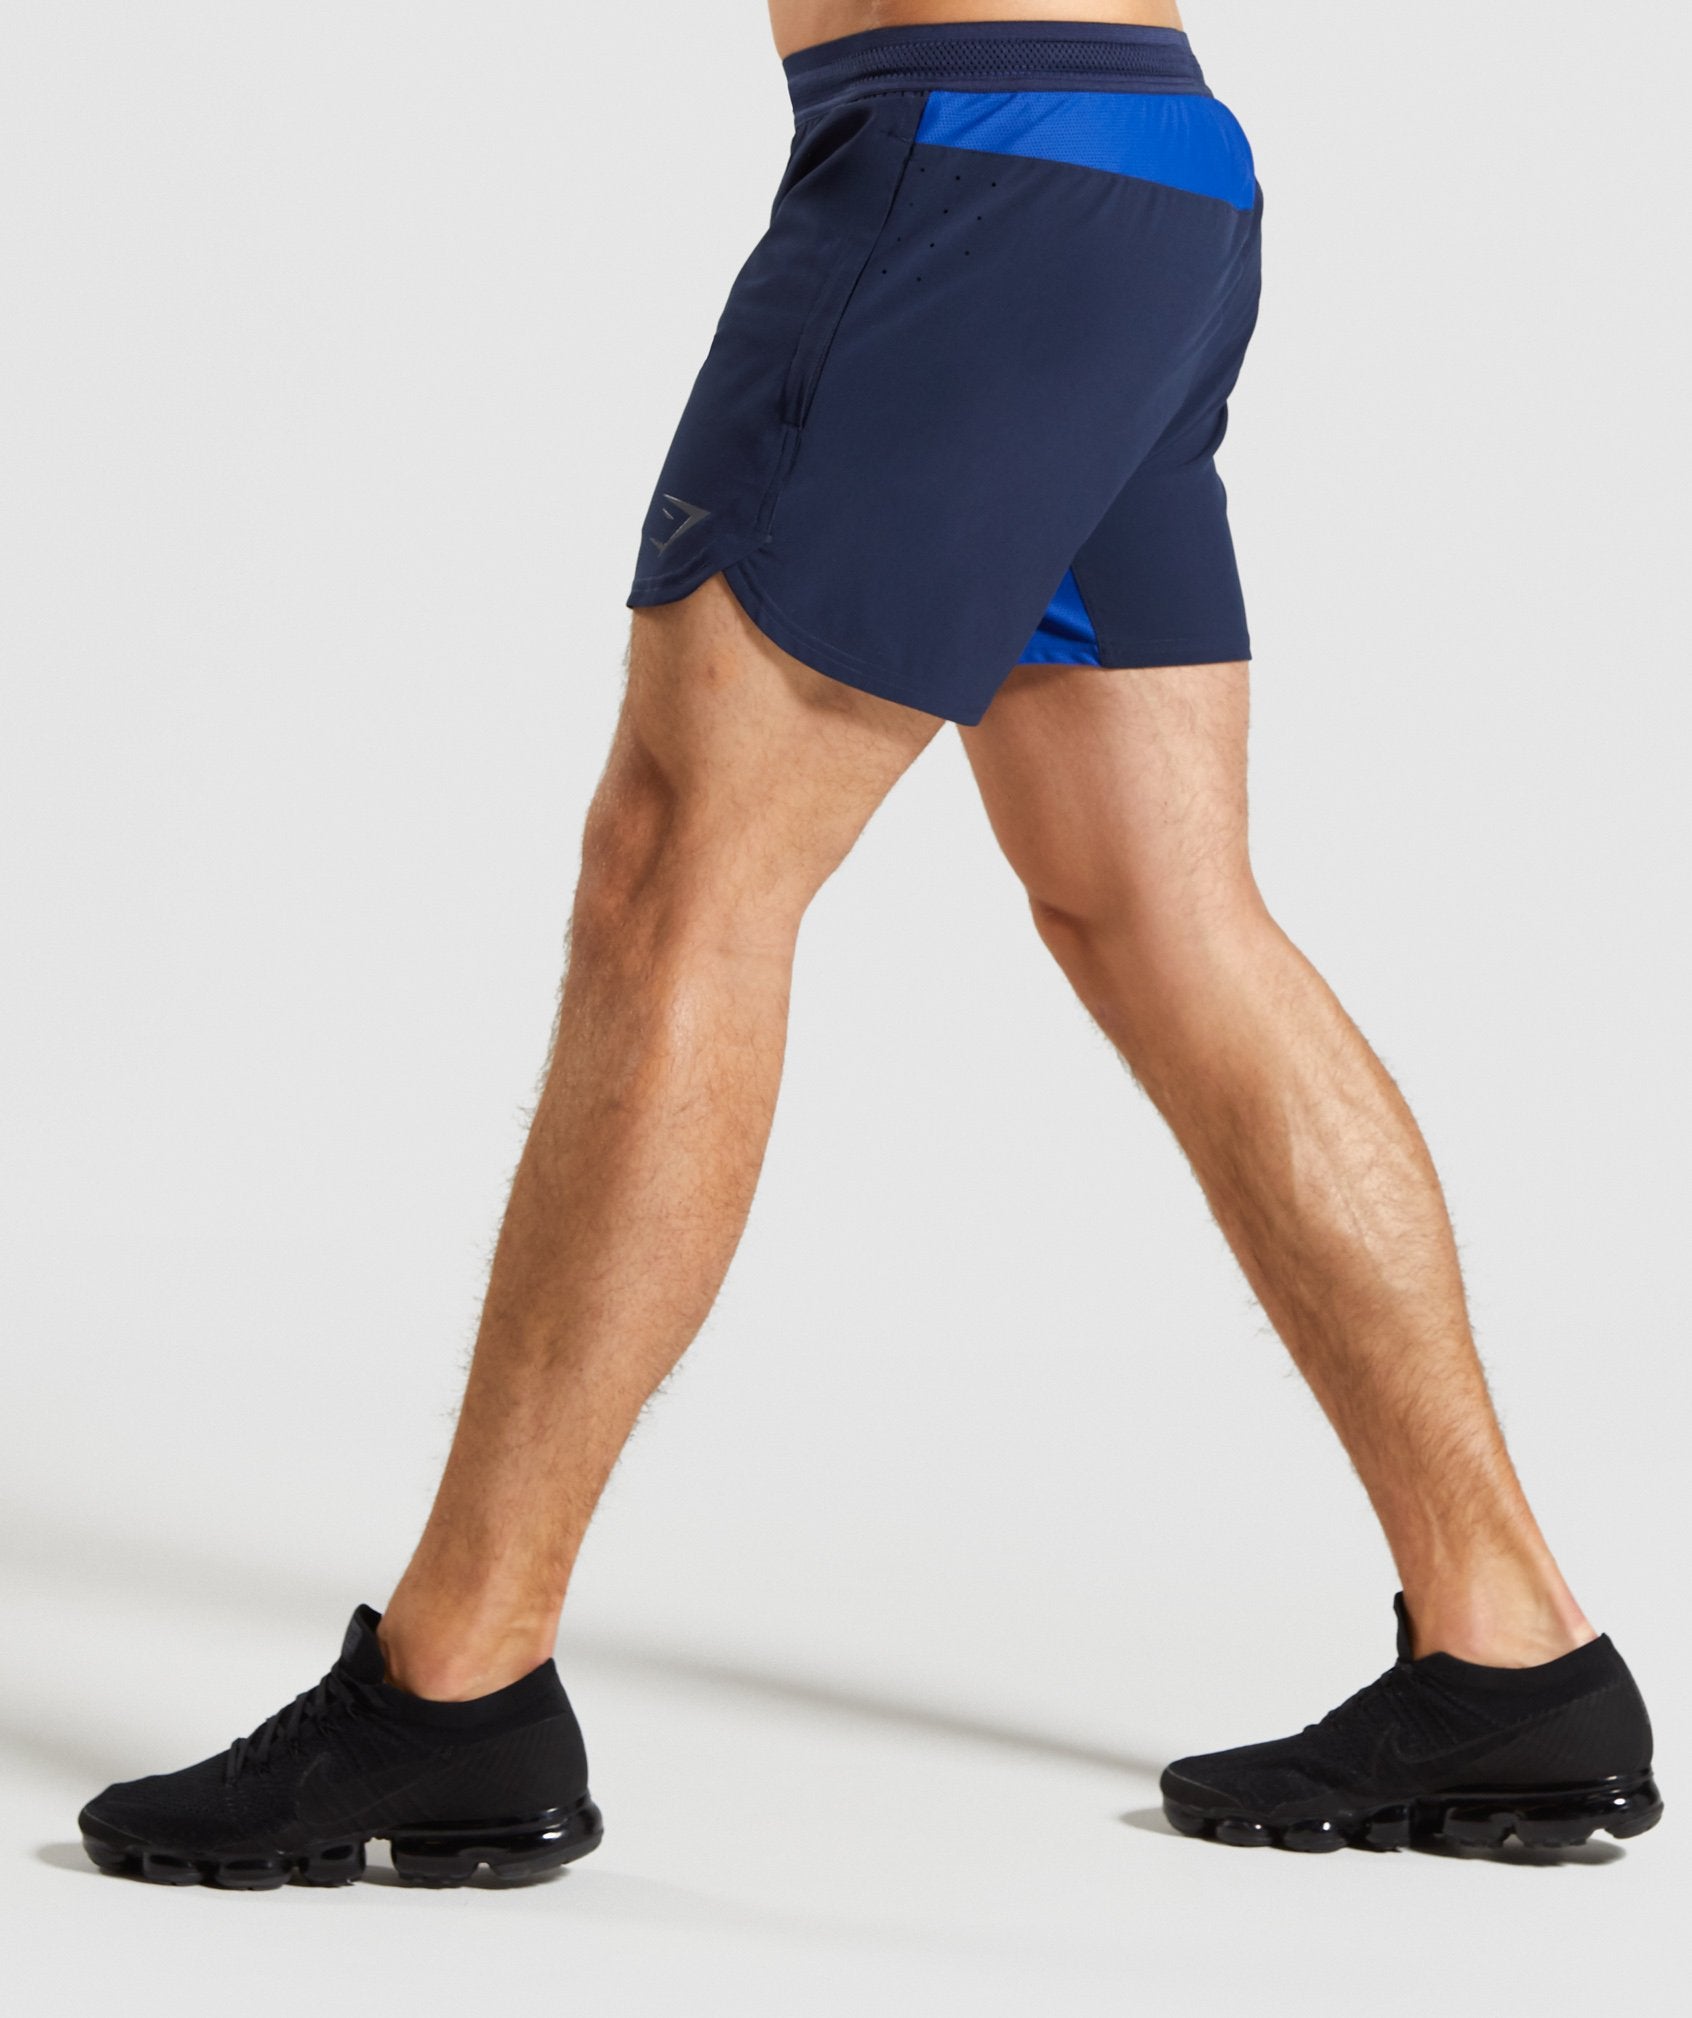 Speed Shorts in Blue - view 3